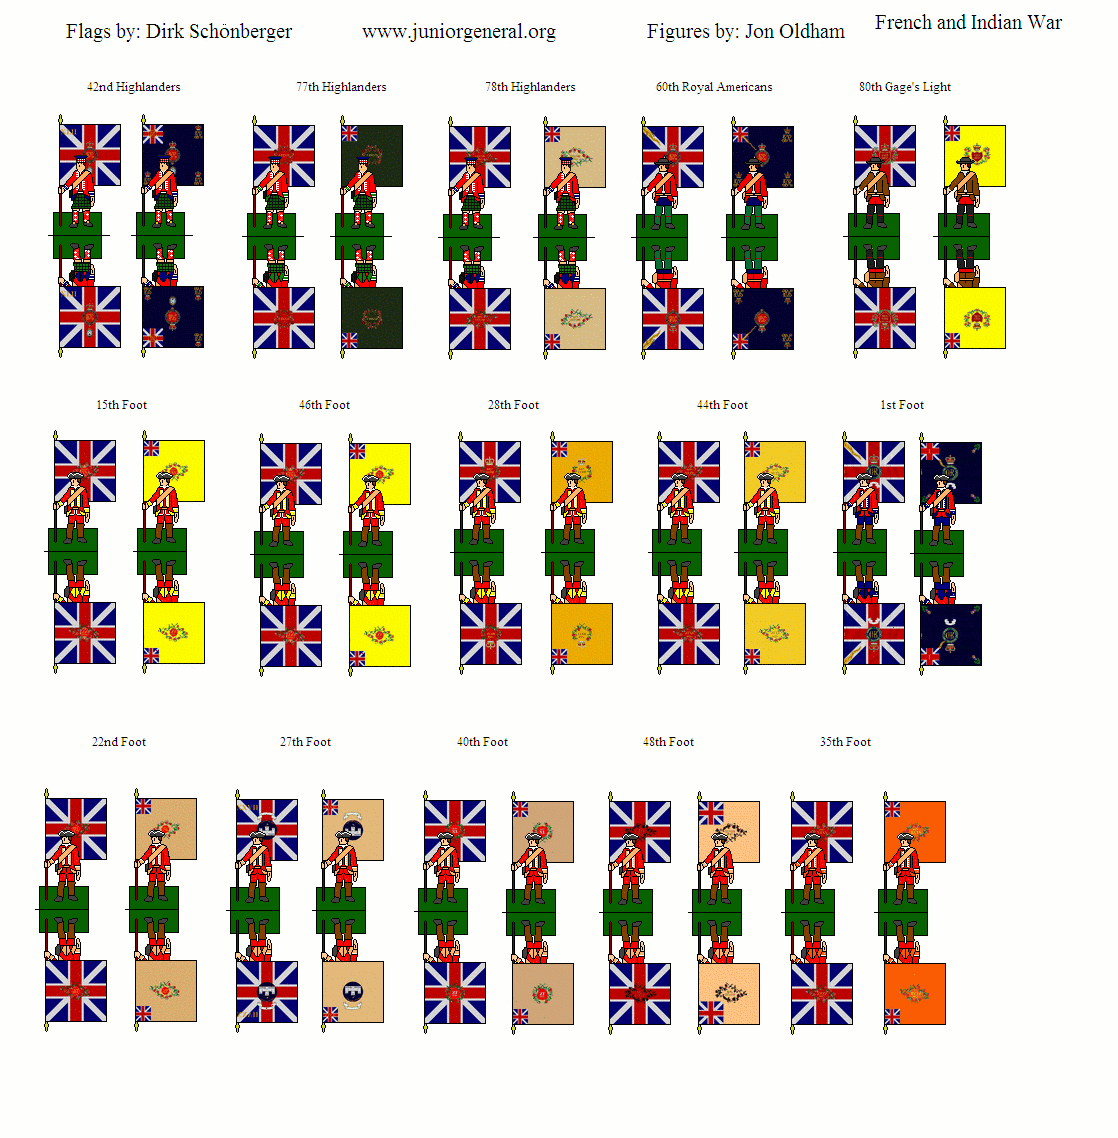 British Flags in French and Indian War